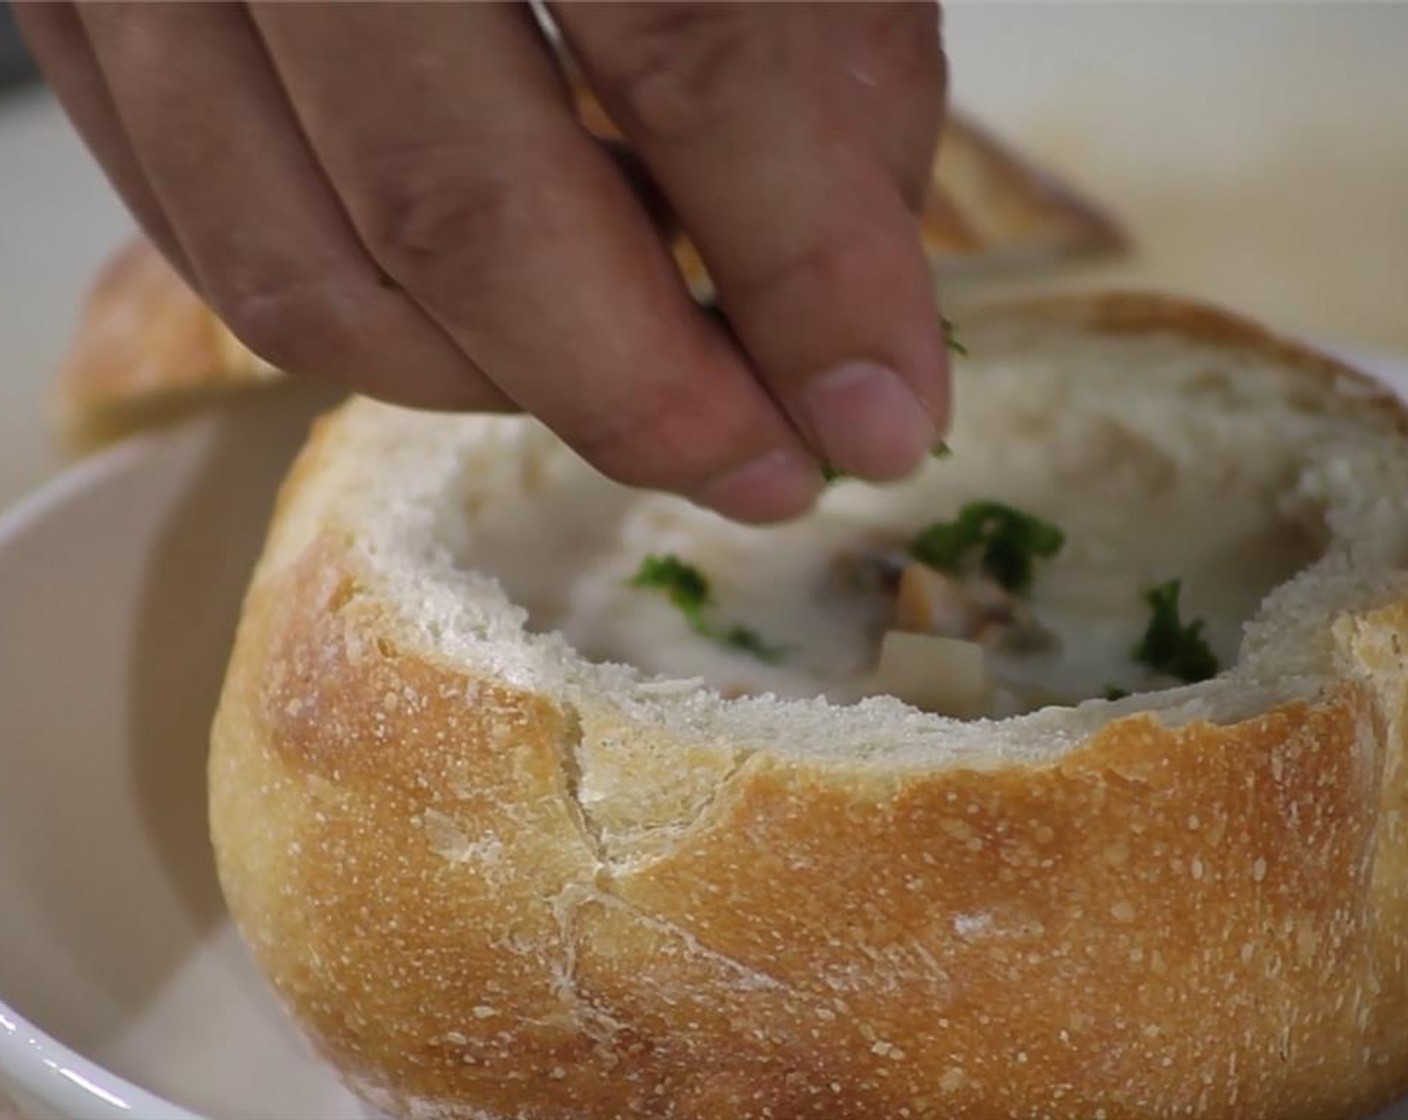 step 4 Ladle soup into the bread bowl. Finely chop some Fresh Parsley (to taste) and/or Fresh Chives (to taste) for garnish.